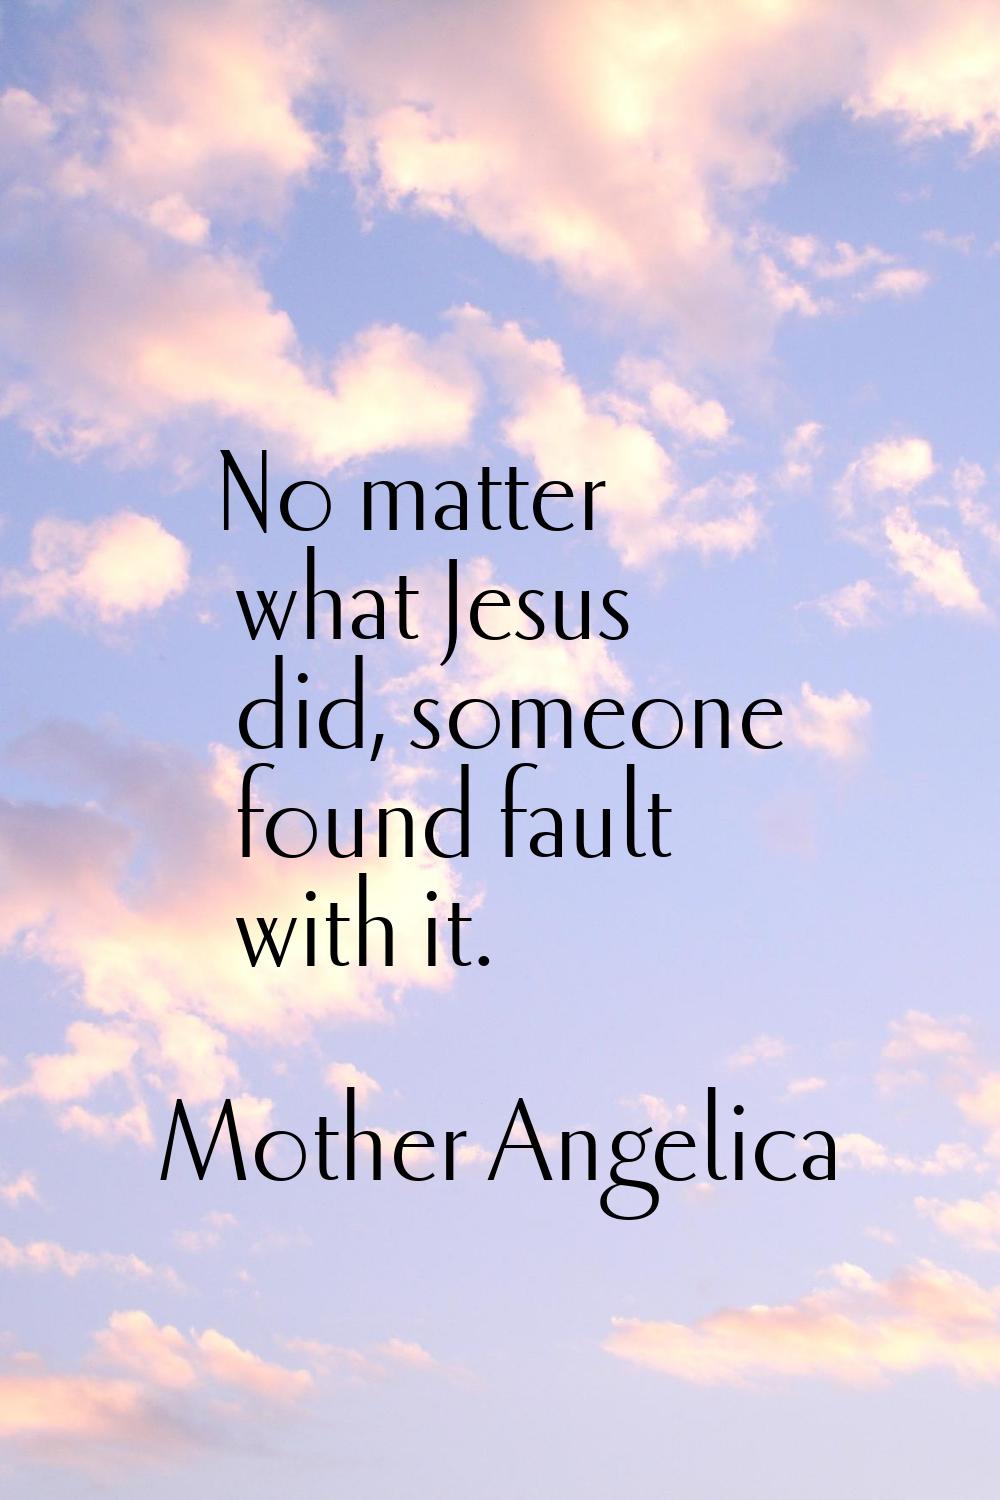 No matter what Jesus did, someone found fault with it.